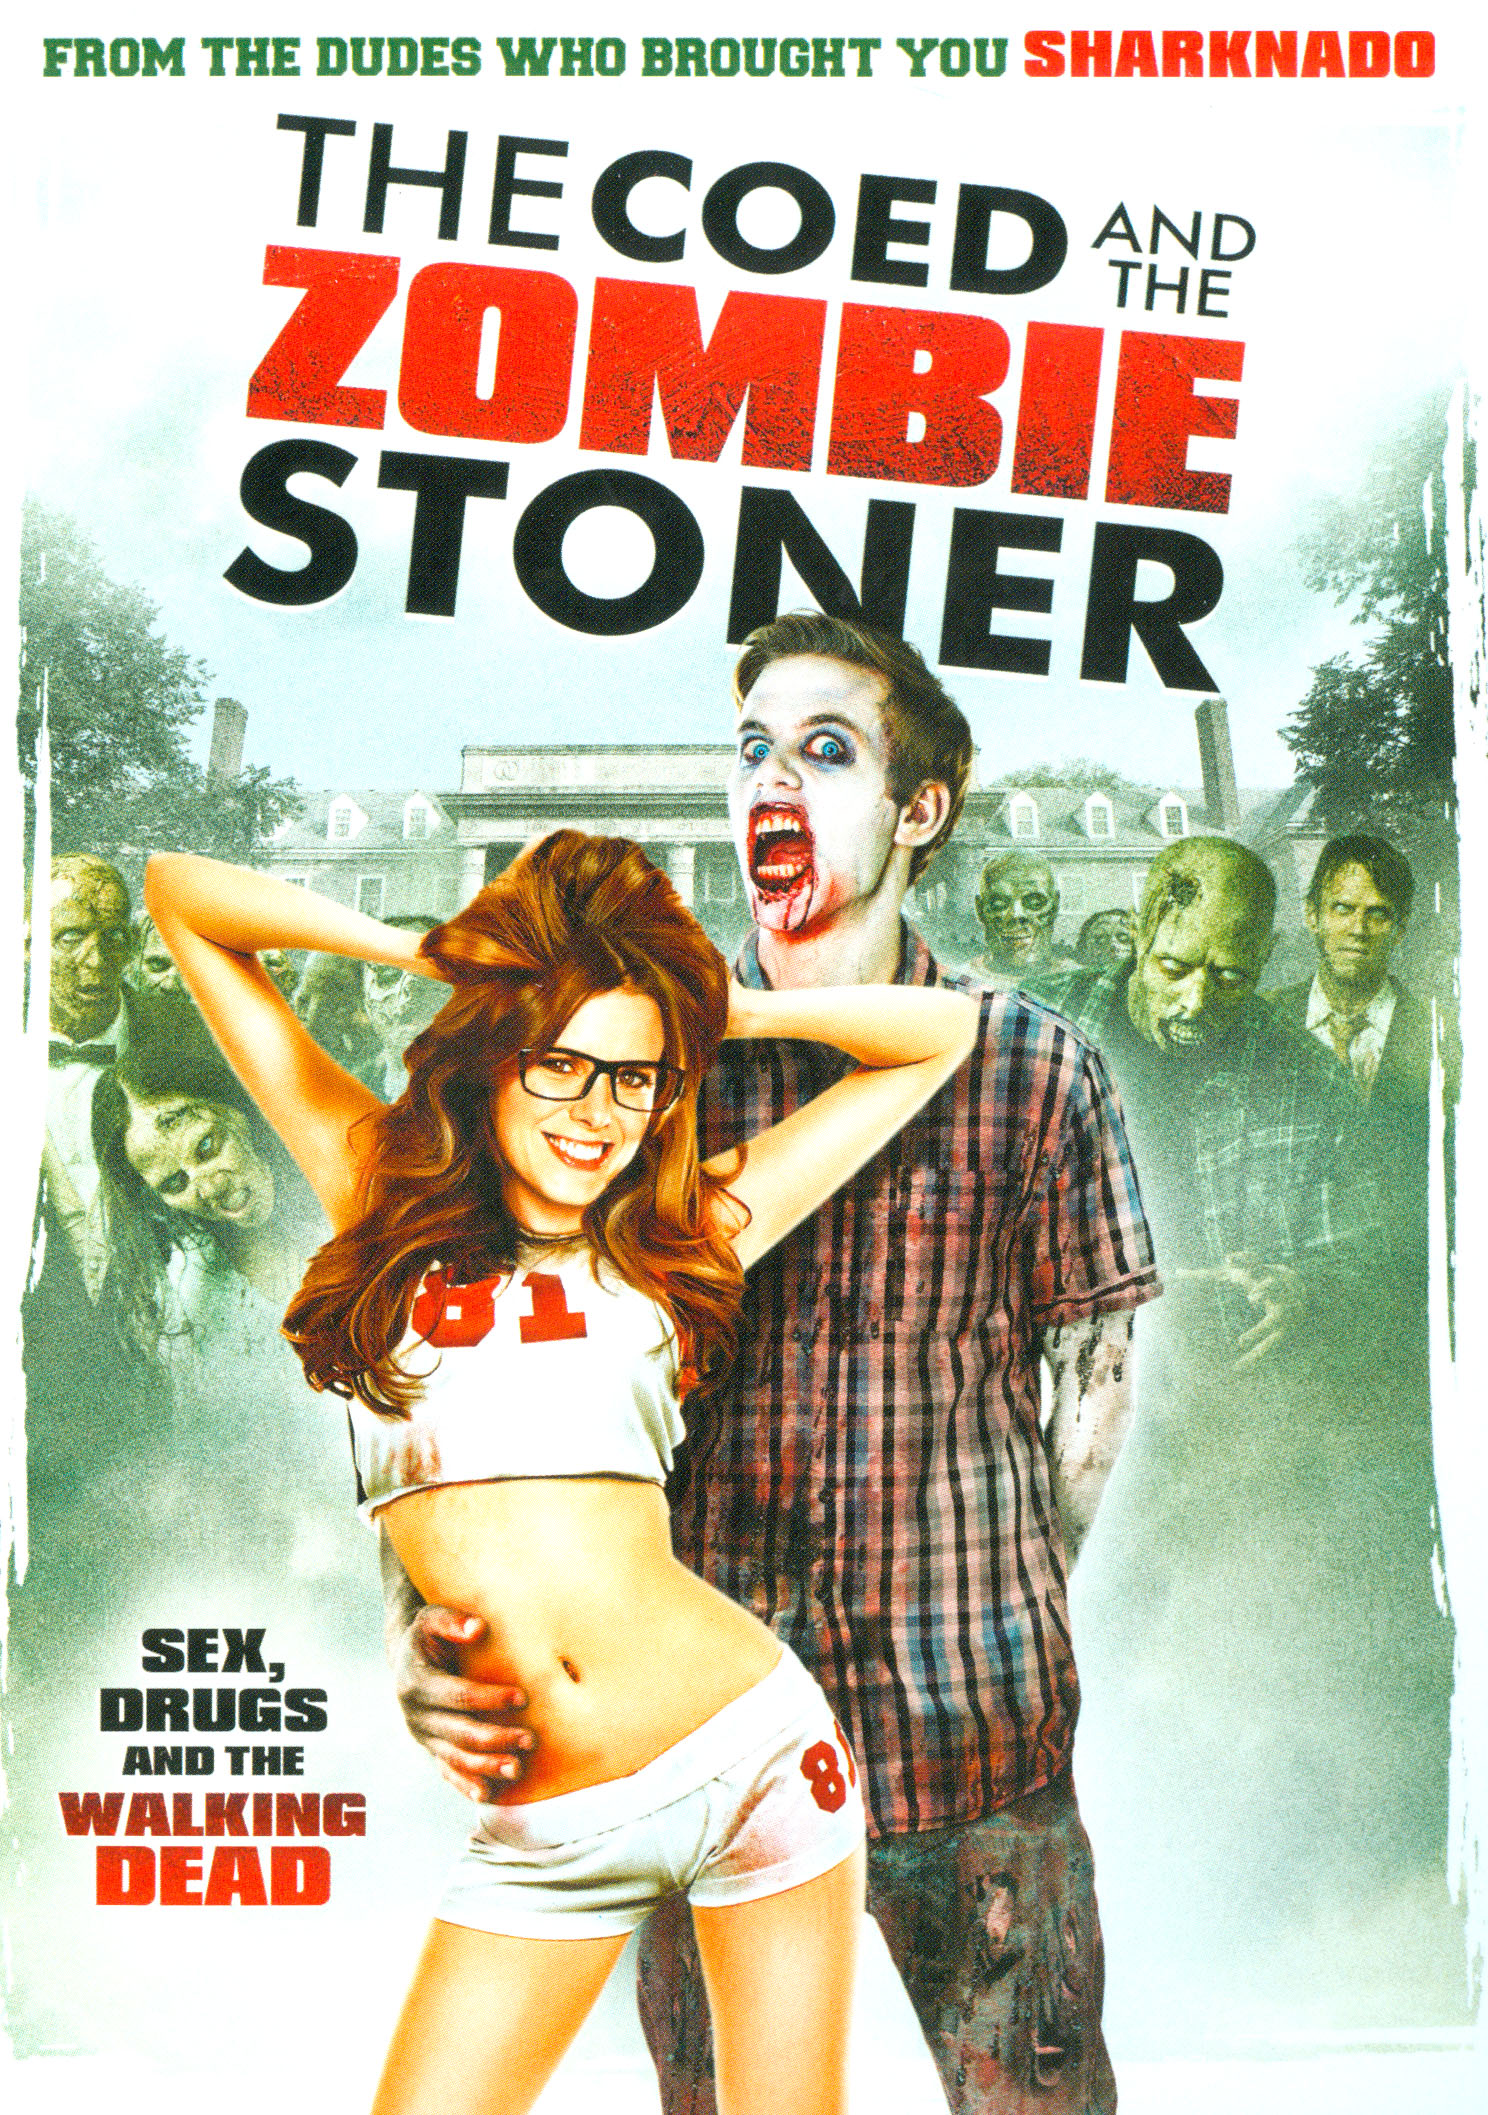 The coed and the zombie stoner